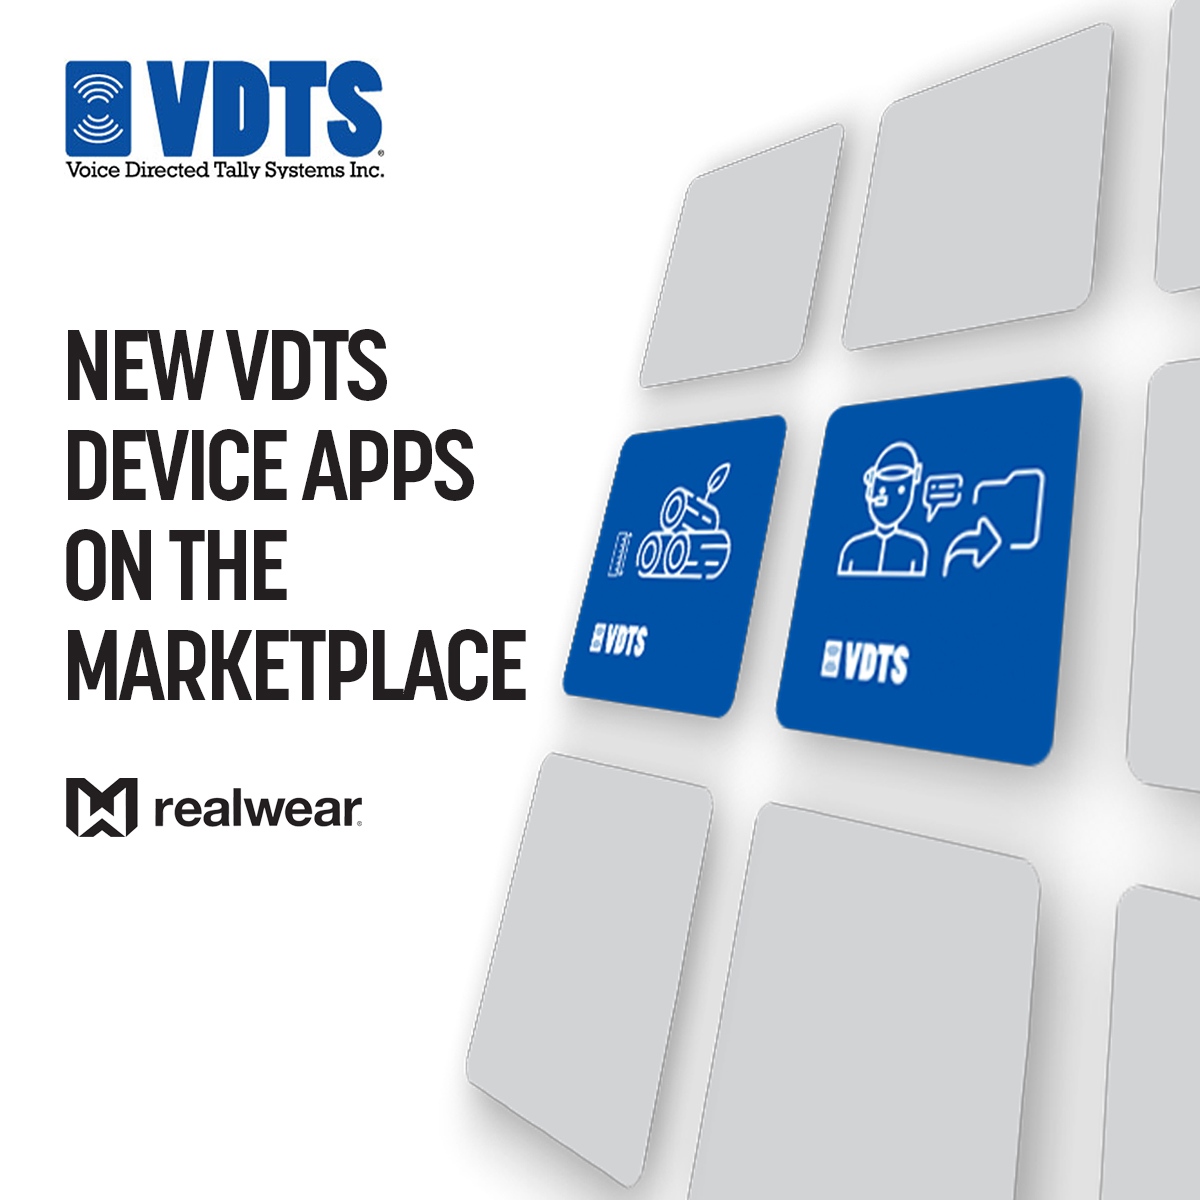 VDTS apps are now on the exciting new RealWear© Marketplace.  Software solutions to unlock the power of your device.
imsend.me/vdtsapps-rw

#appmarketplace #apps #freeyourhands #datacollection #handsfree #wearabletechnology #remoteworker